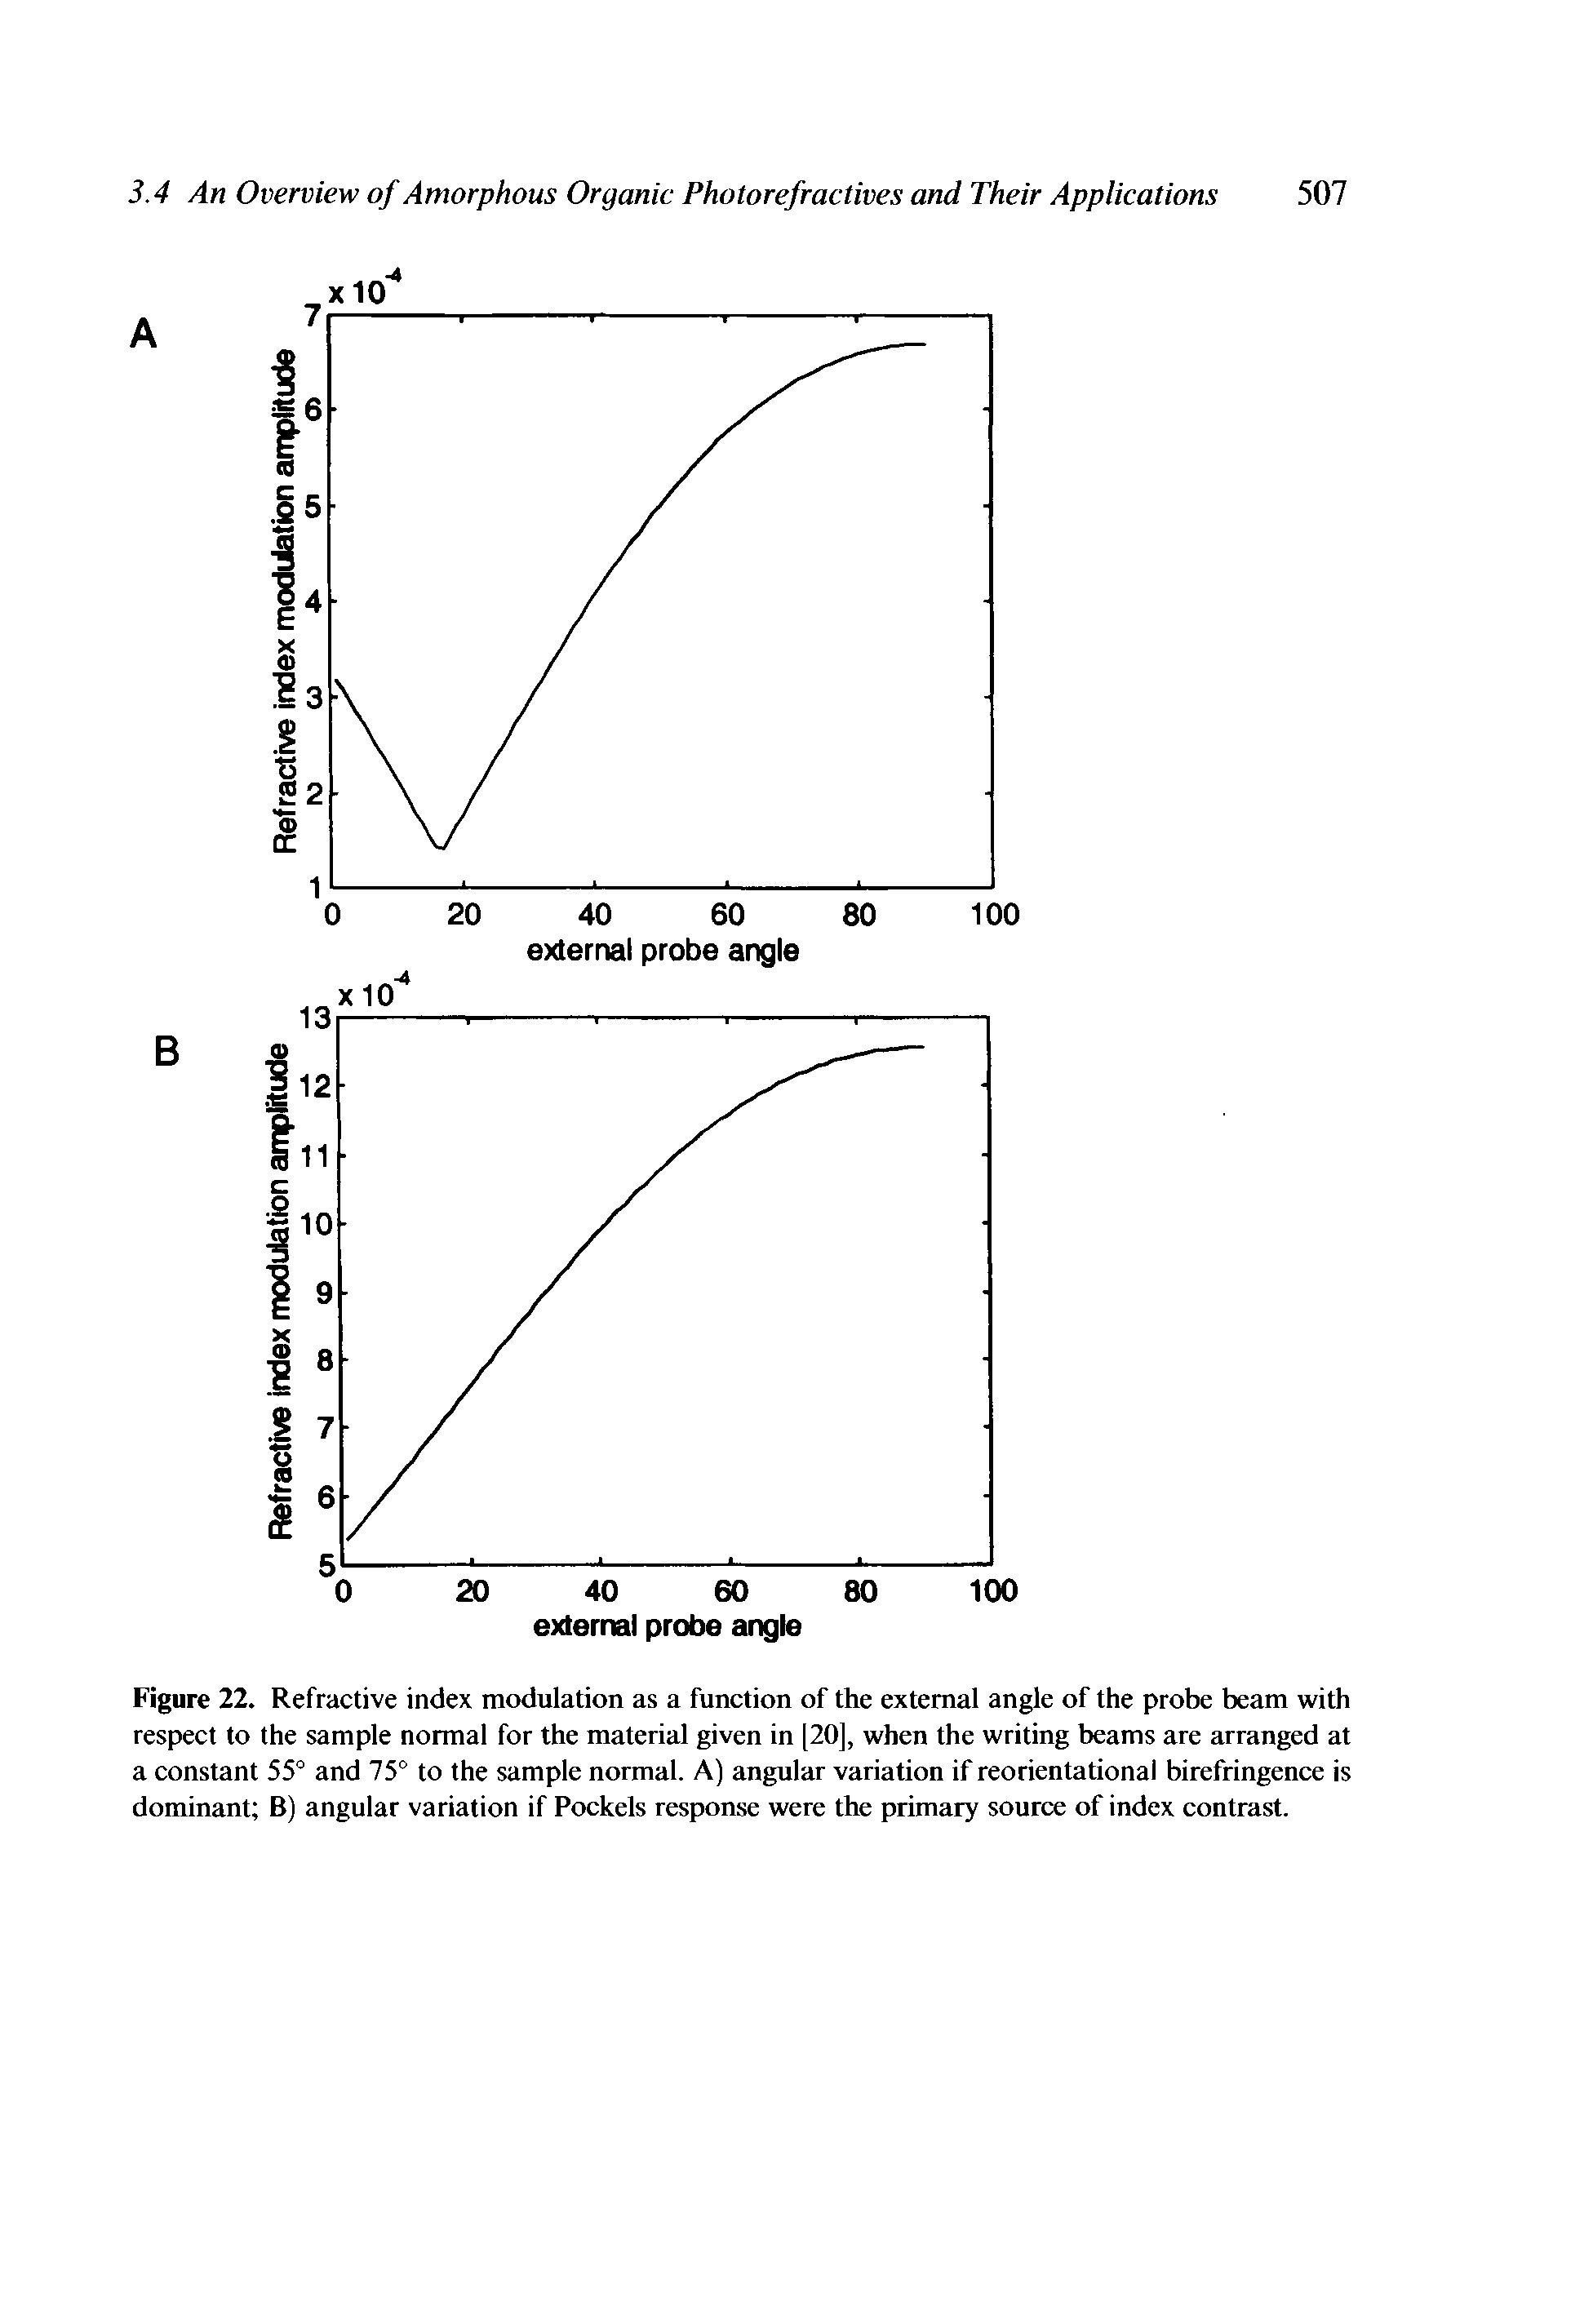 Figure 22. Refractive index modulation as a function of the external angle of the probe beam with respect to the sample normal for the material given in [20], when the writing beams are arranged at a constant 55° and 75° to the sample normal. A) angular variation if reorientational birefringence is dominant B) angular variation if Pockels response were the primary source of index contrast.